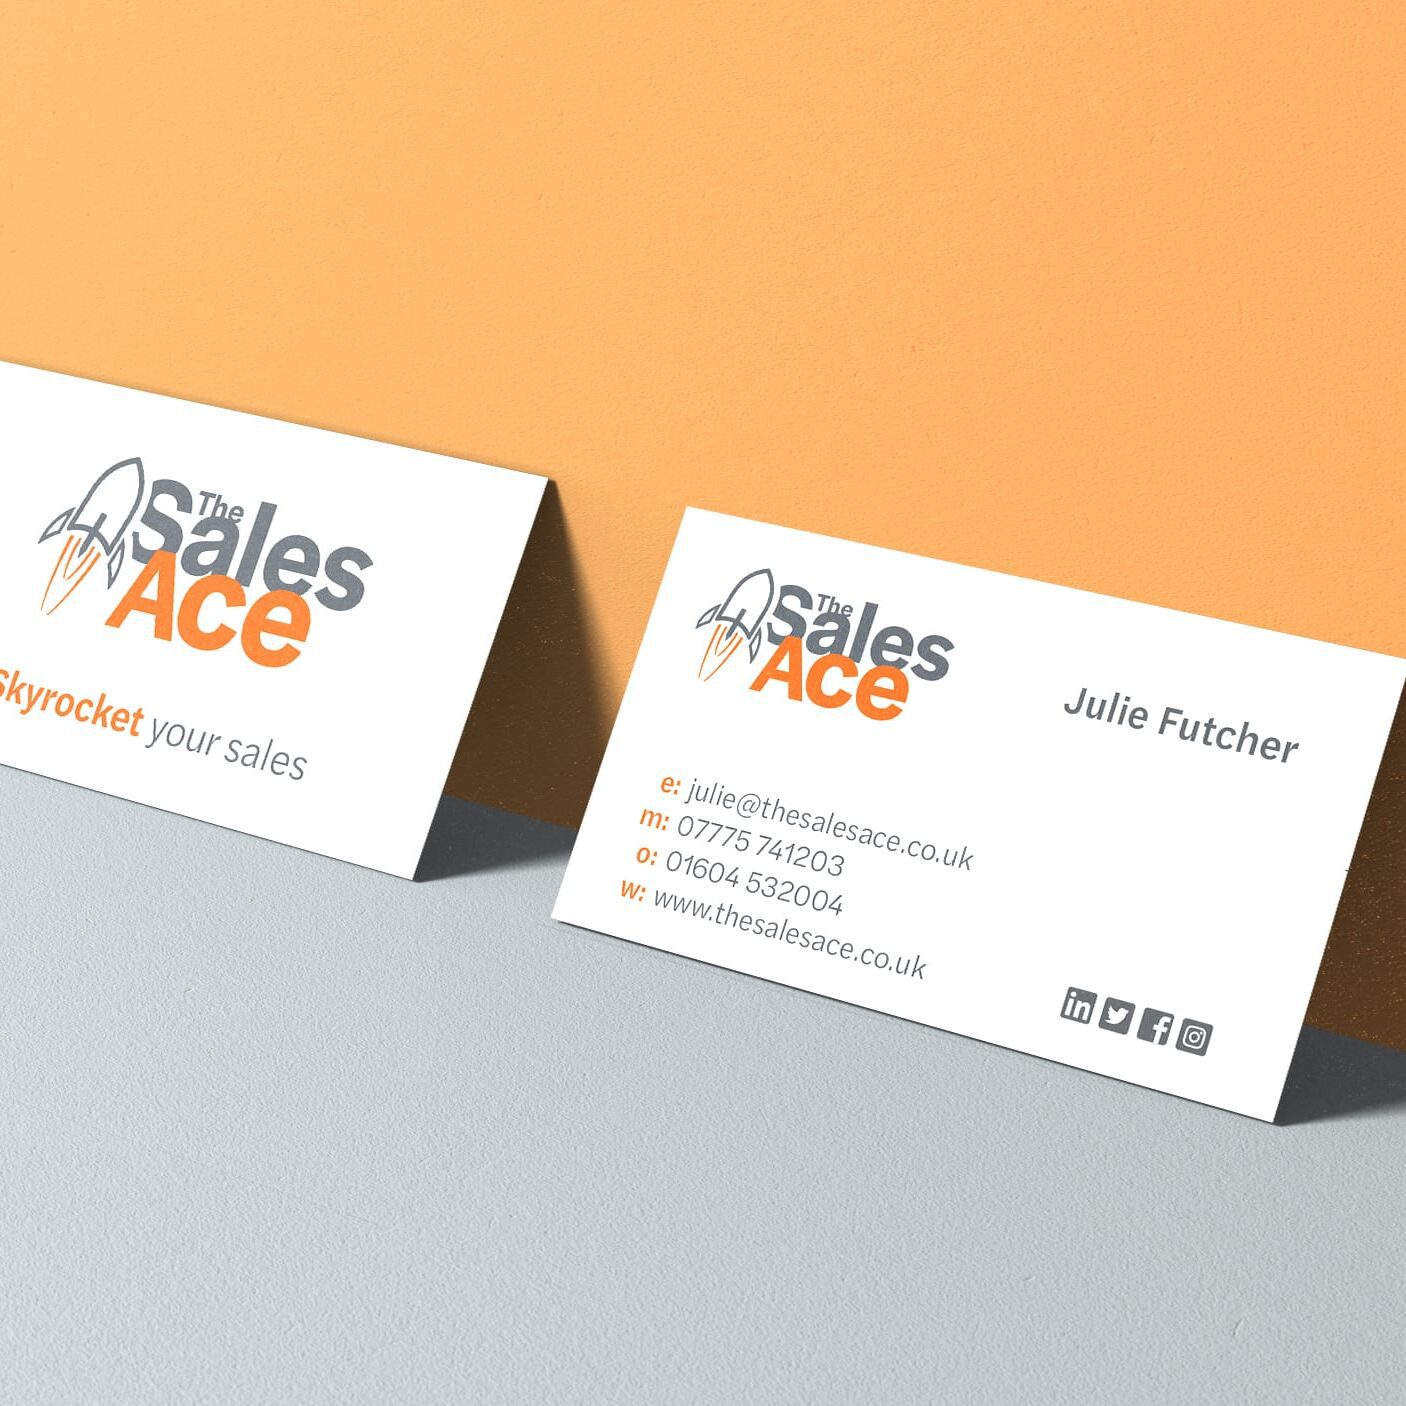 Design for The Sales Ace business cards using new logo